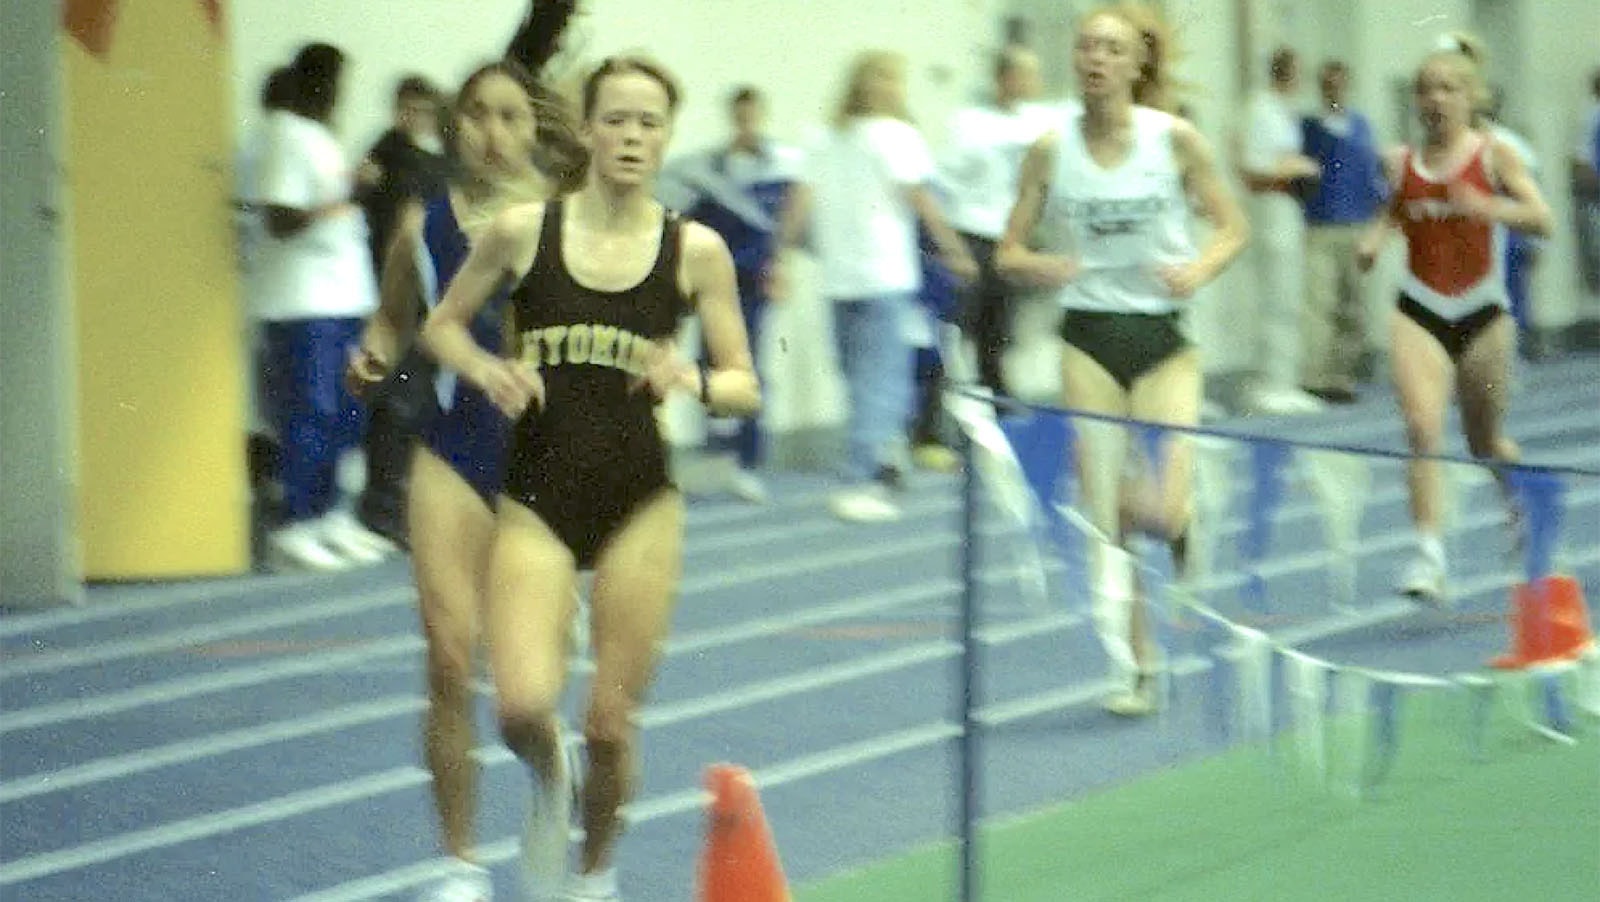 An avid runner, Amy Wroe Bechtel ran cross-country for the University of Wyoming and still holds the school record for the 3,000 meters.